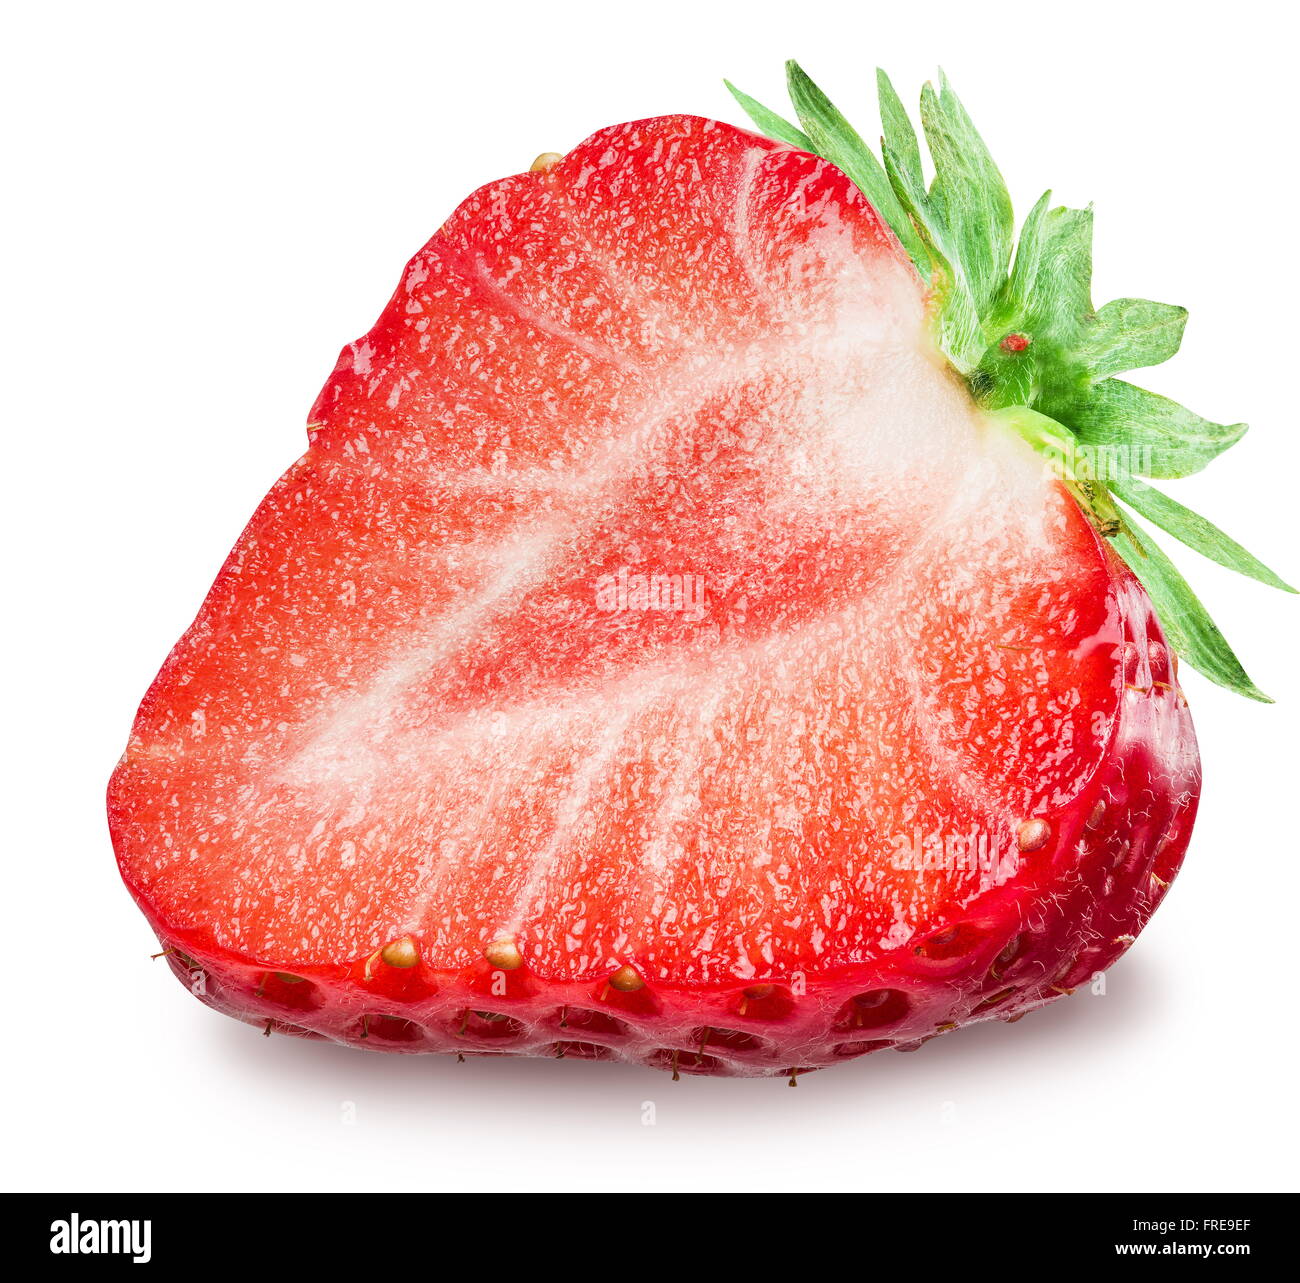 One half of strawberry on the white background. File contains clipping paths. Stock Photo